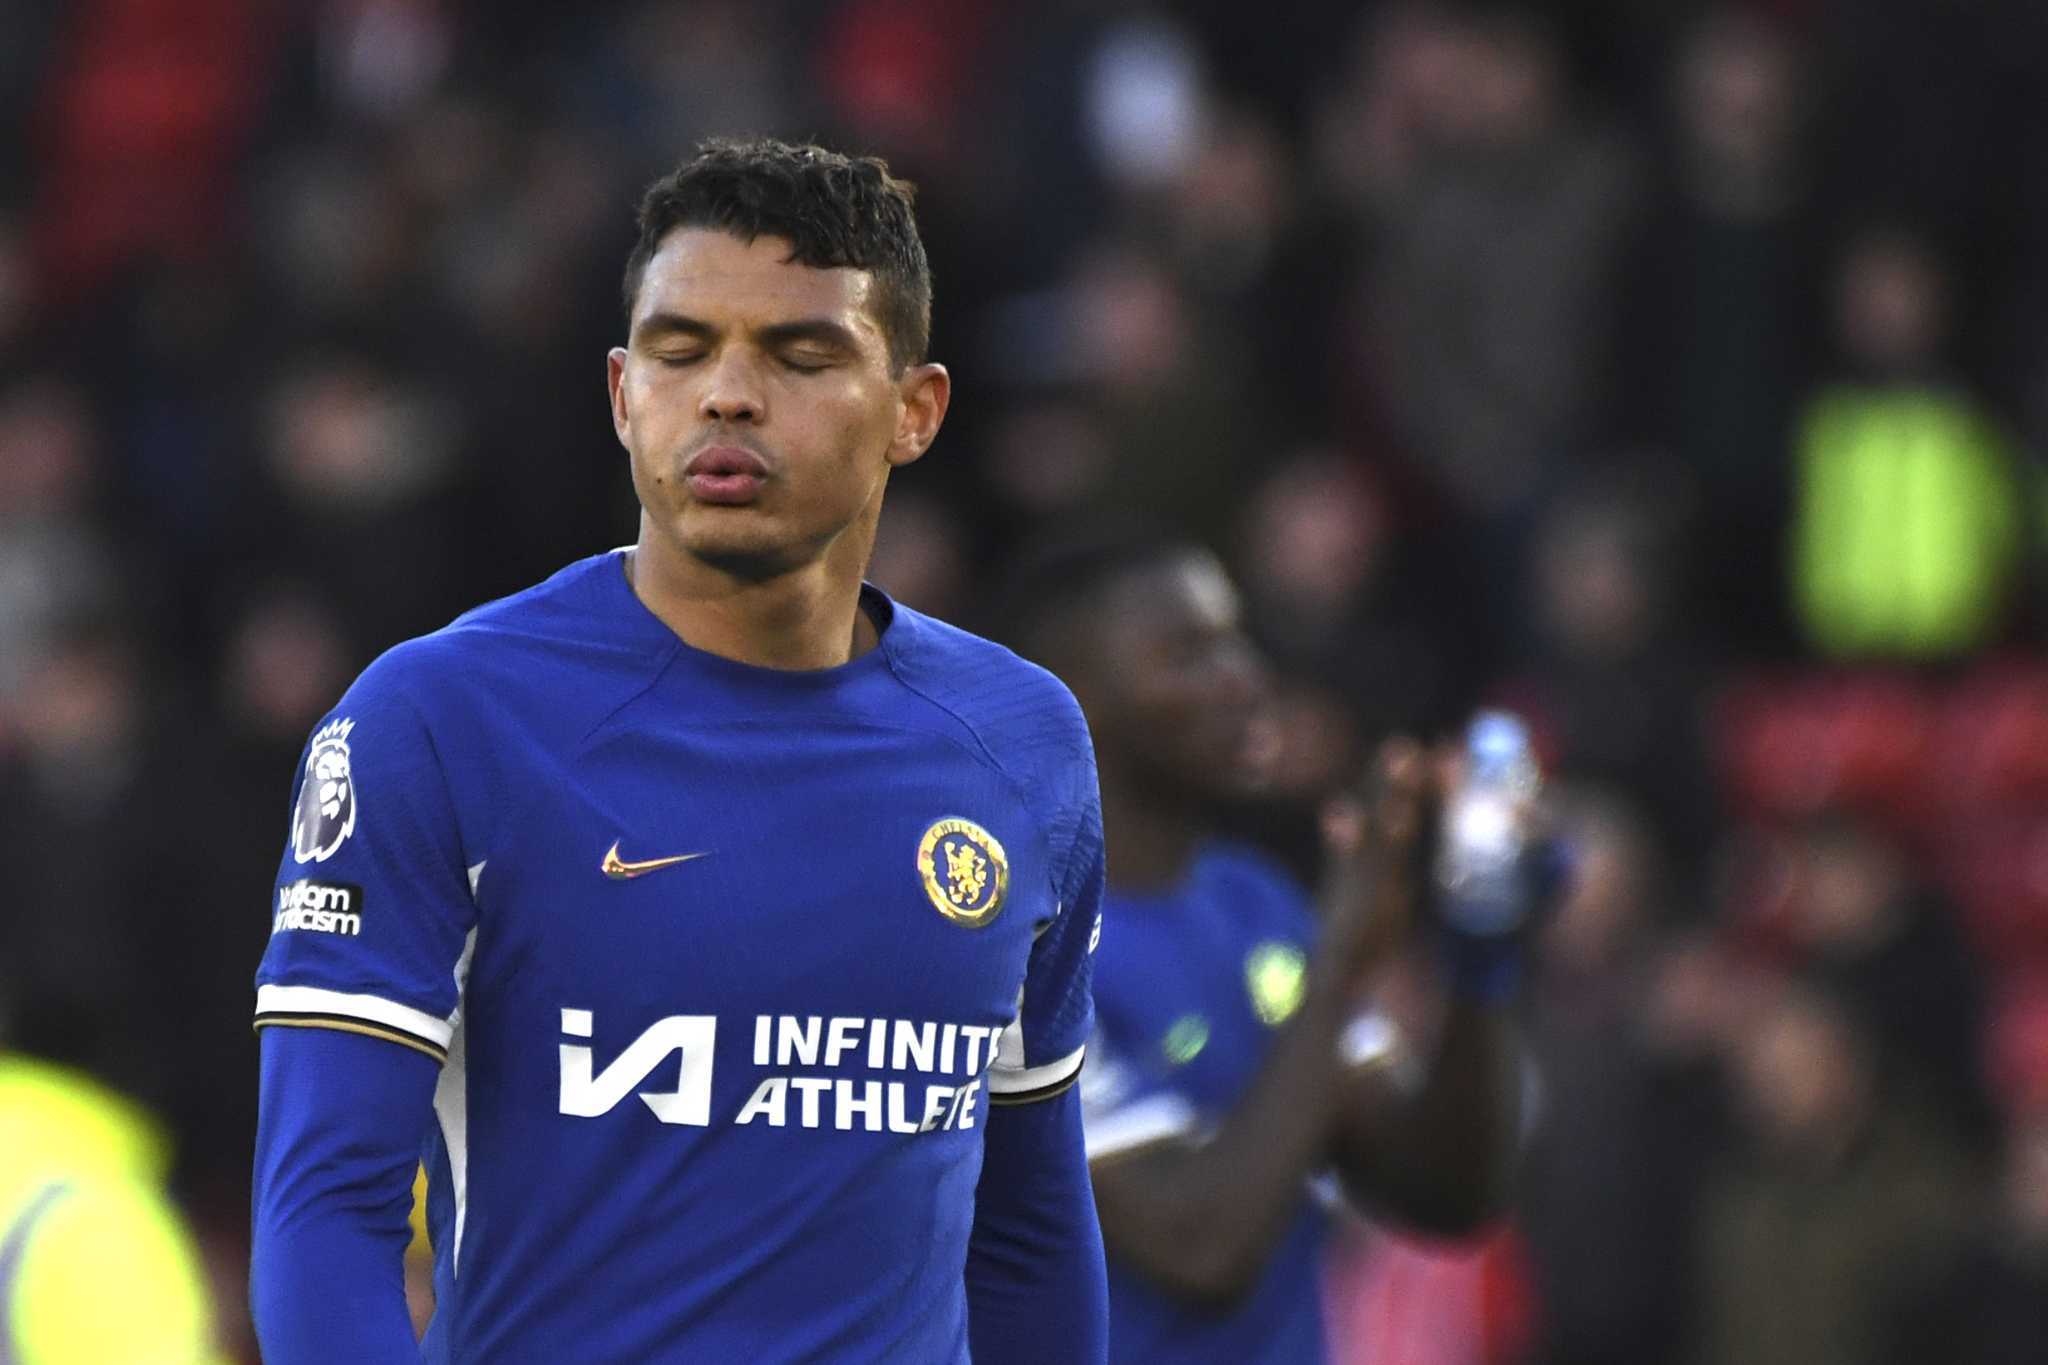 Thiago Silva to leave Chelsea at the end of the season. He plans to return one day 'in another role'